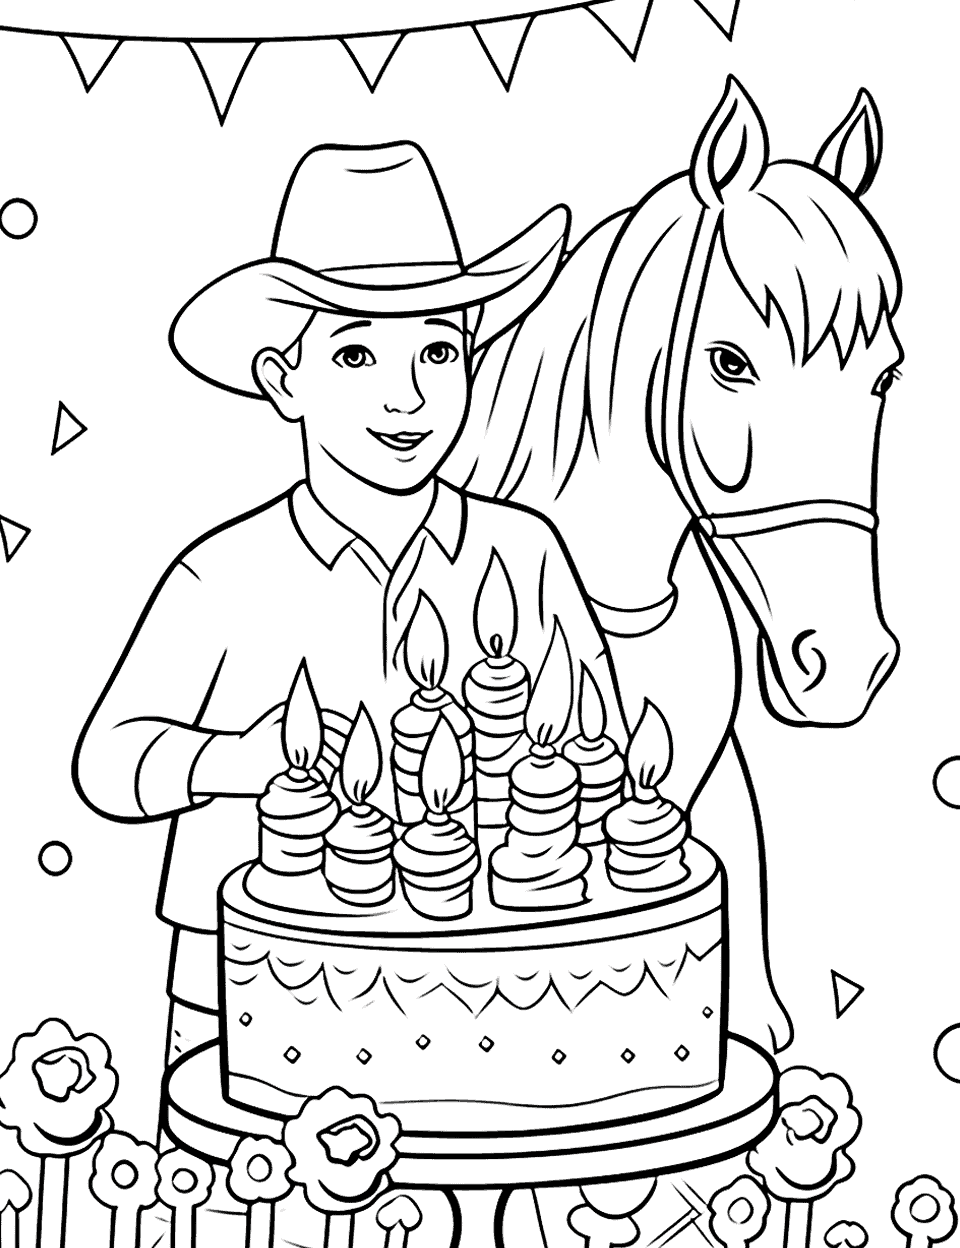 Cowboy's Wild West Birthday Happy Coloring Page - A cowboy celebrating his birthday standing next to his horse.